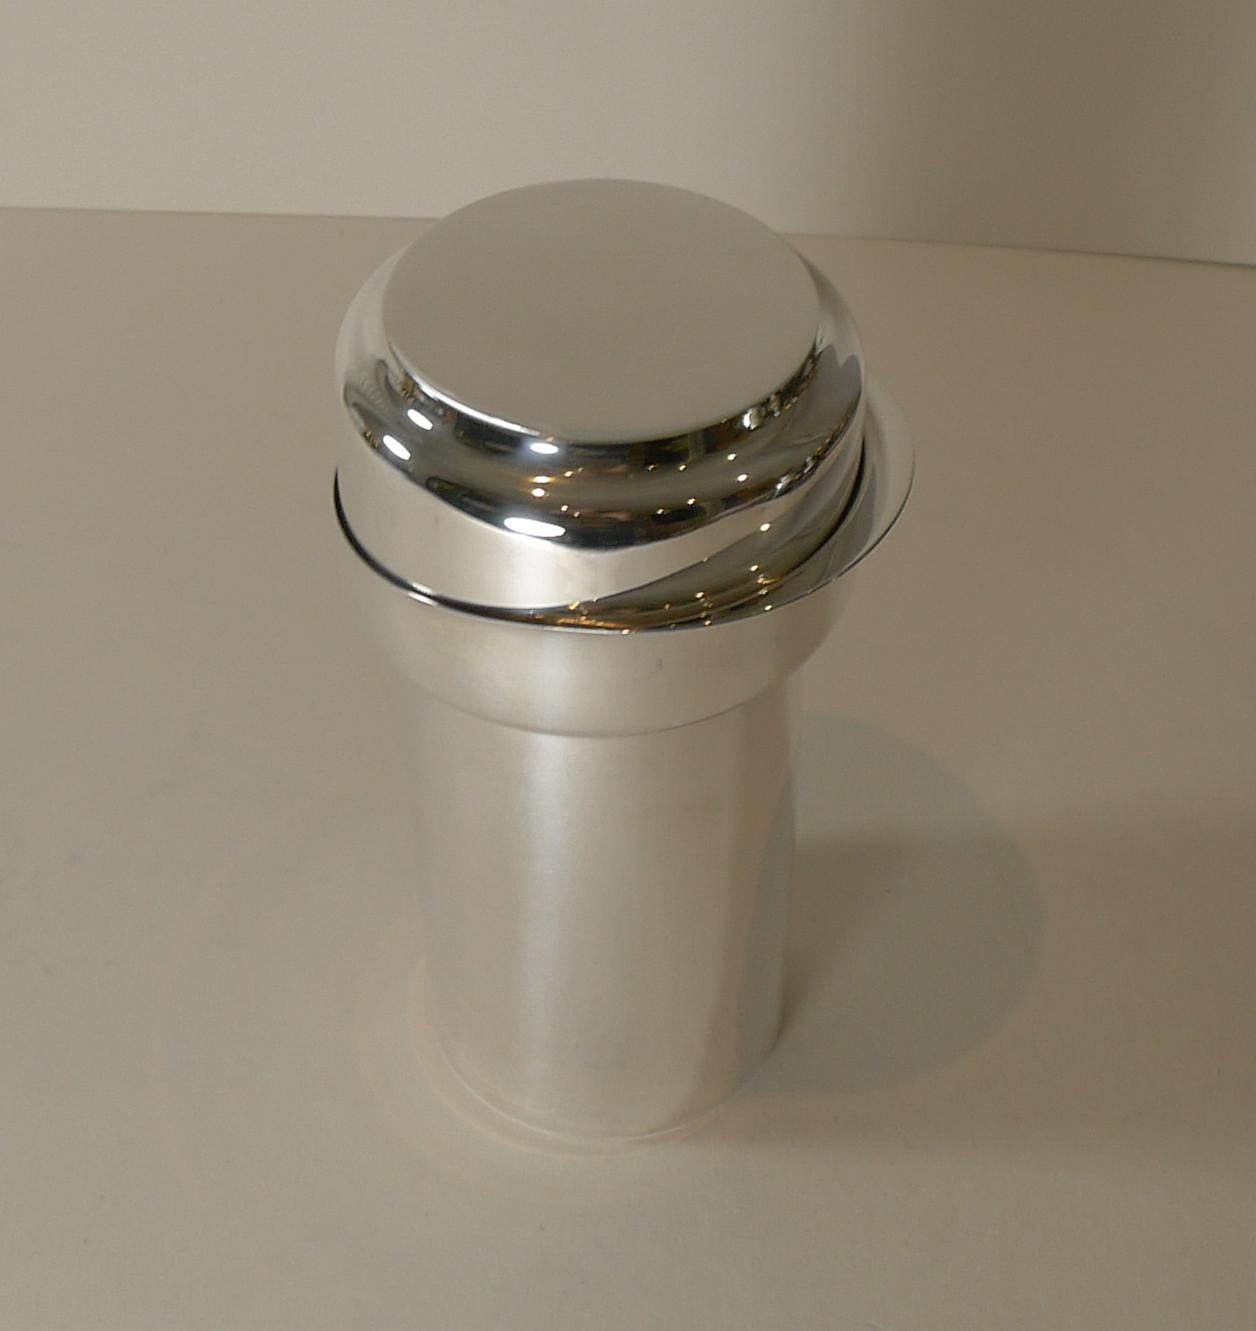 Vintage Italian Silver Plated Cocktail Shaker by Lino Sabattini, c.1960 For Sale 7